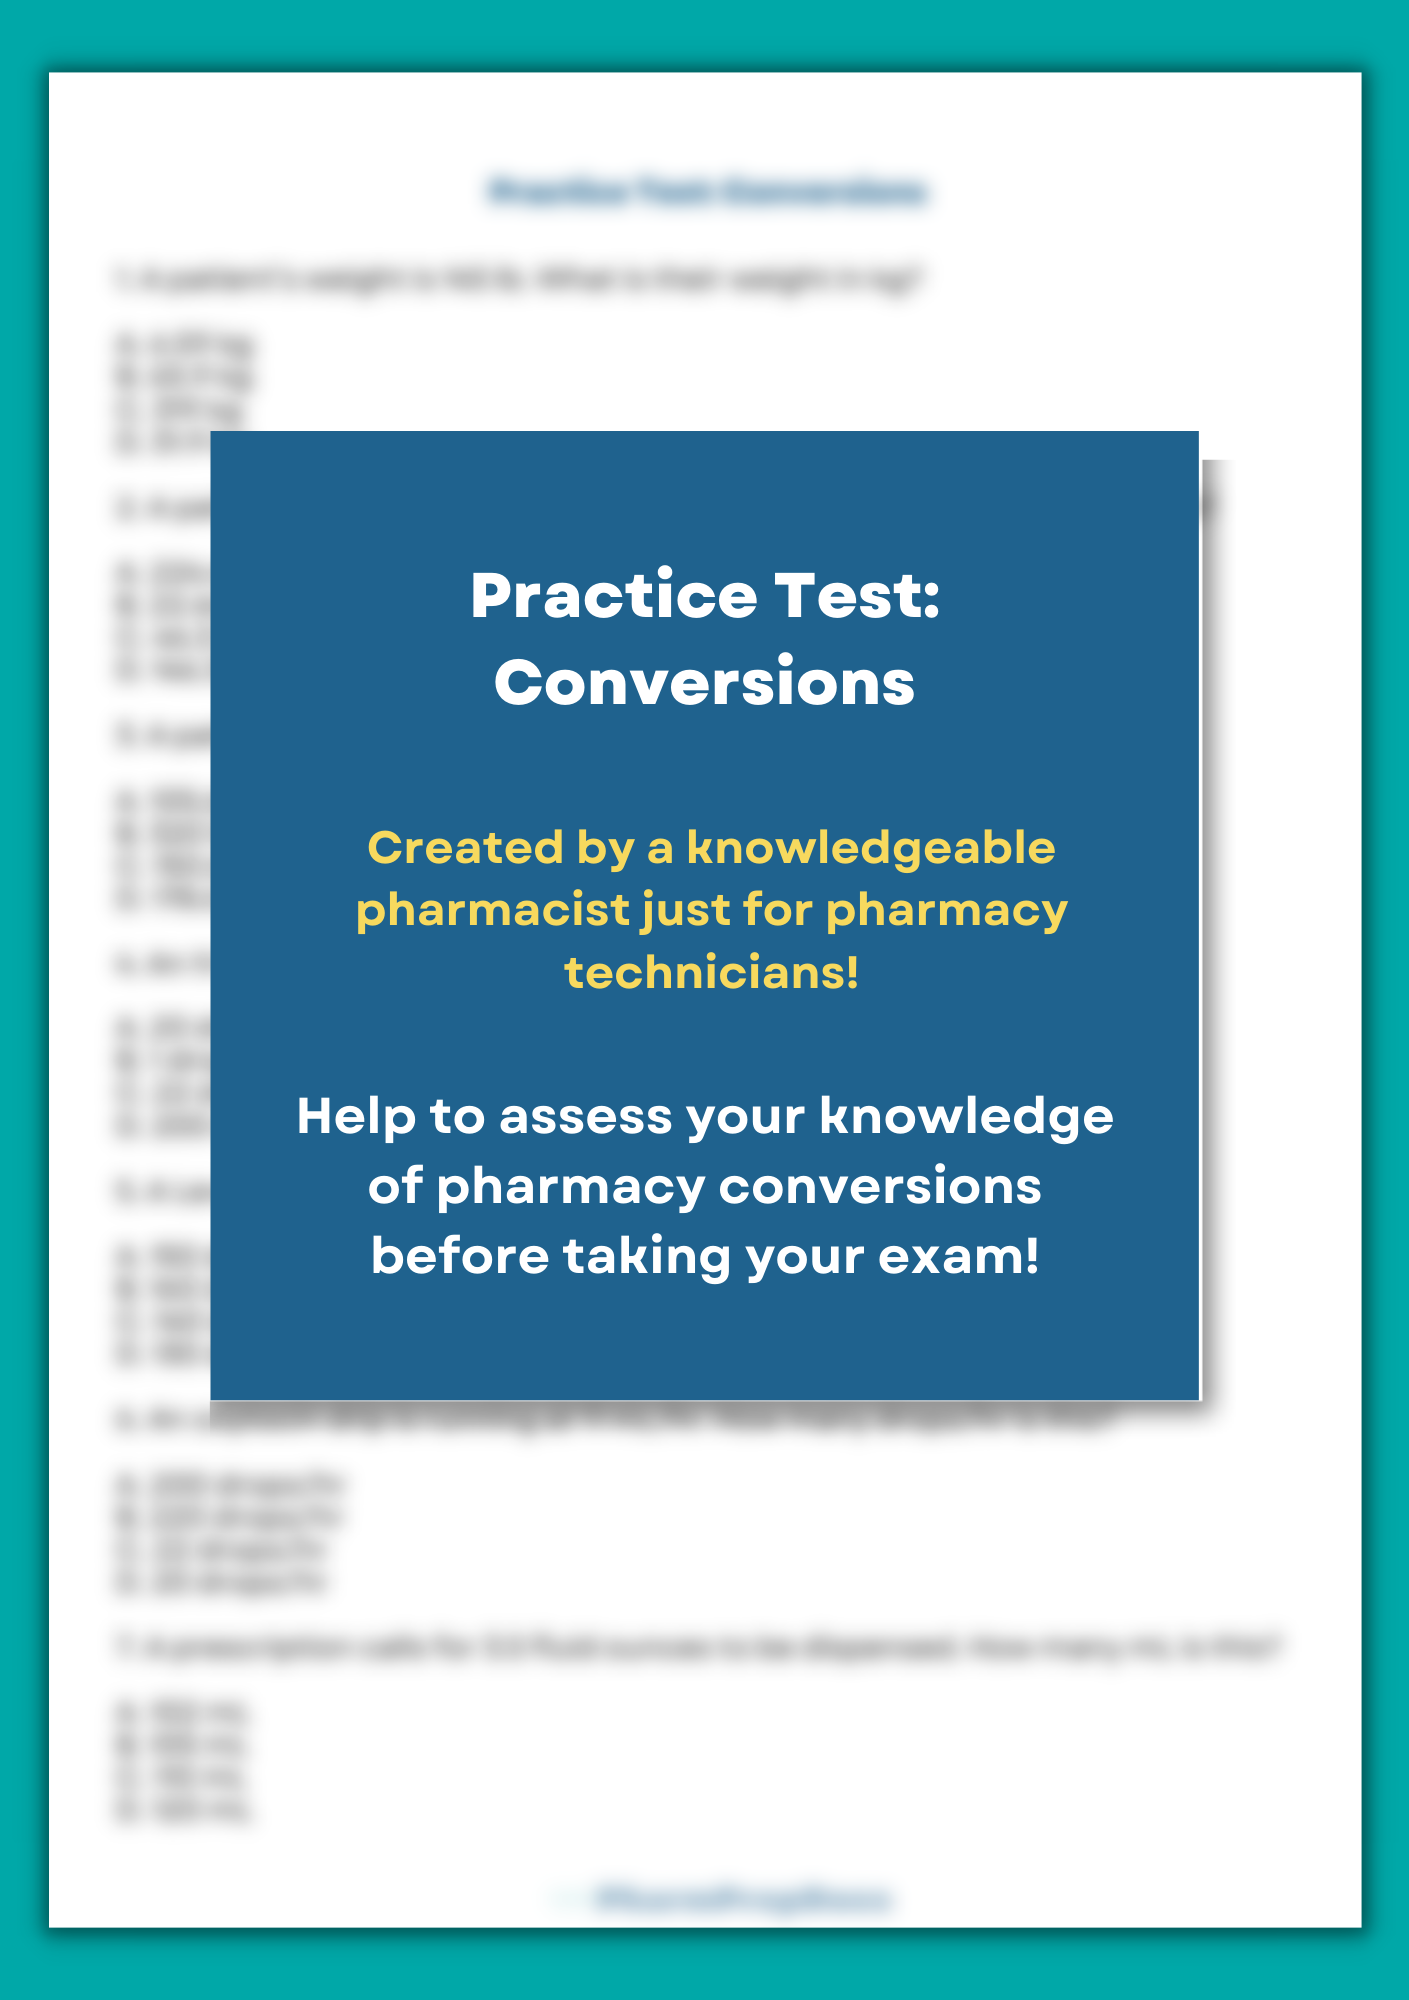 Practice Test: Medication Conversions